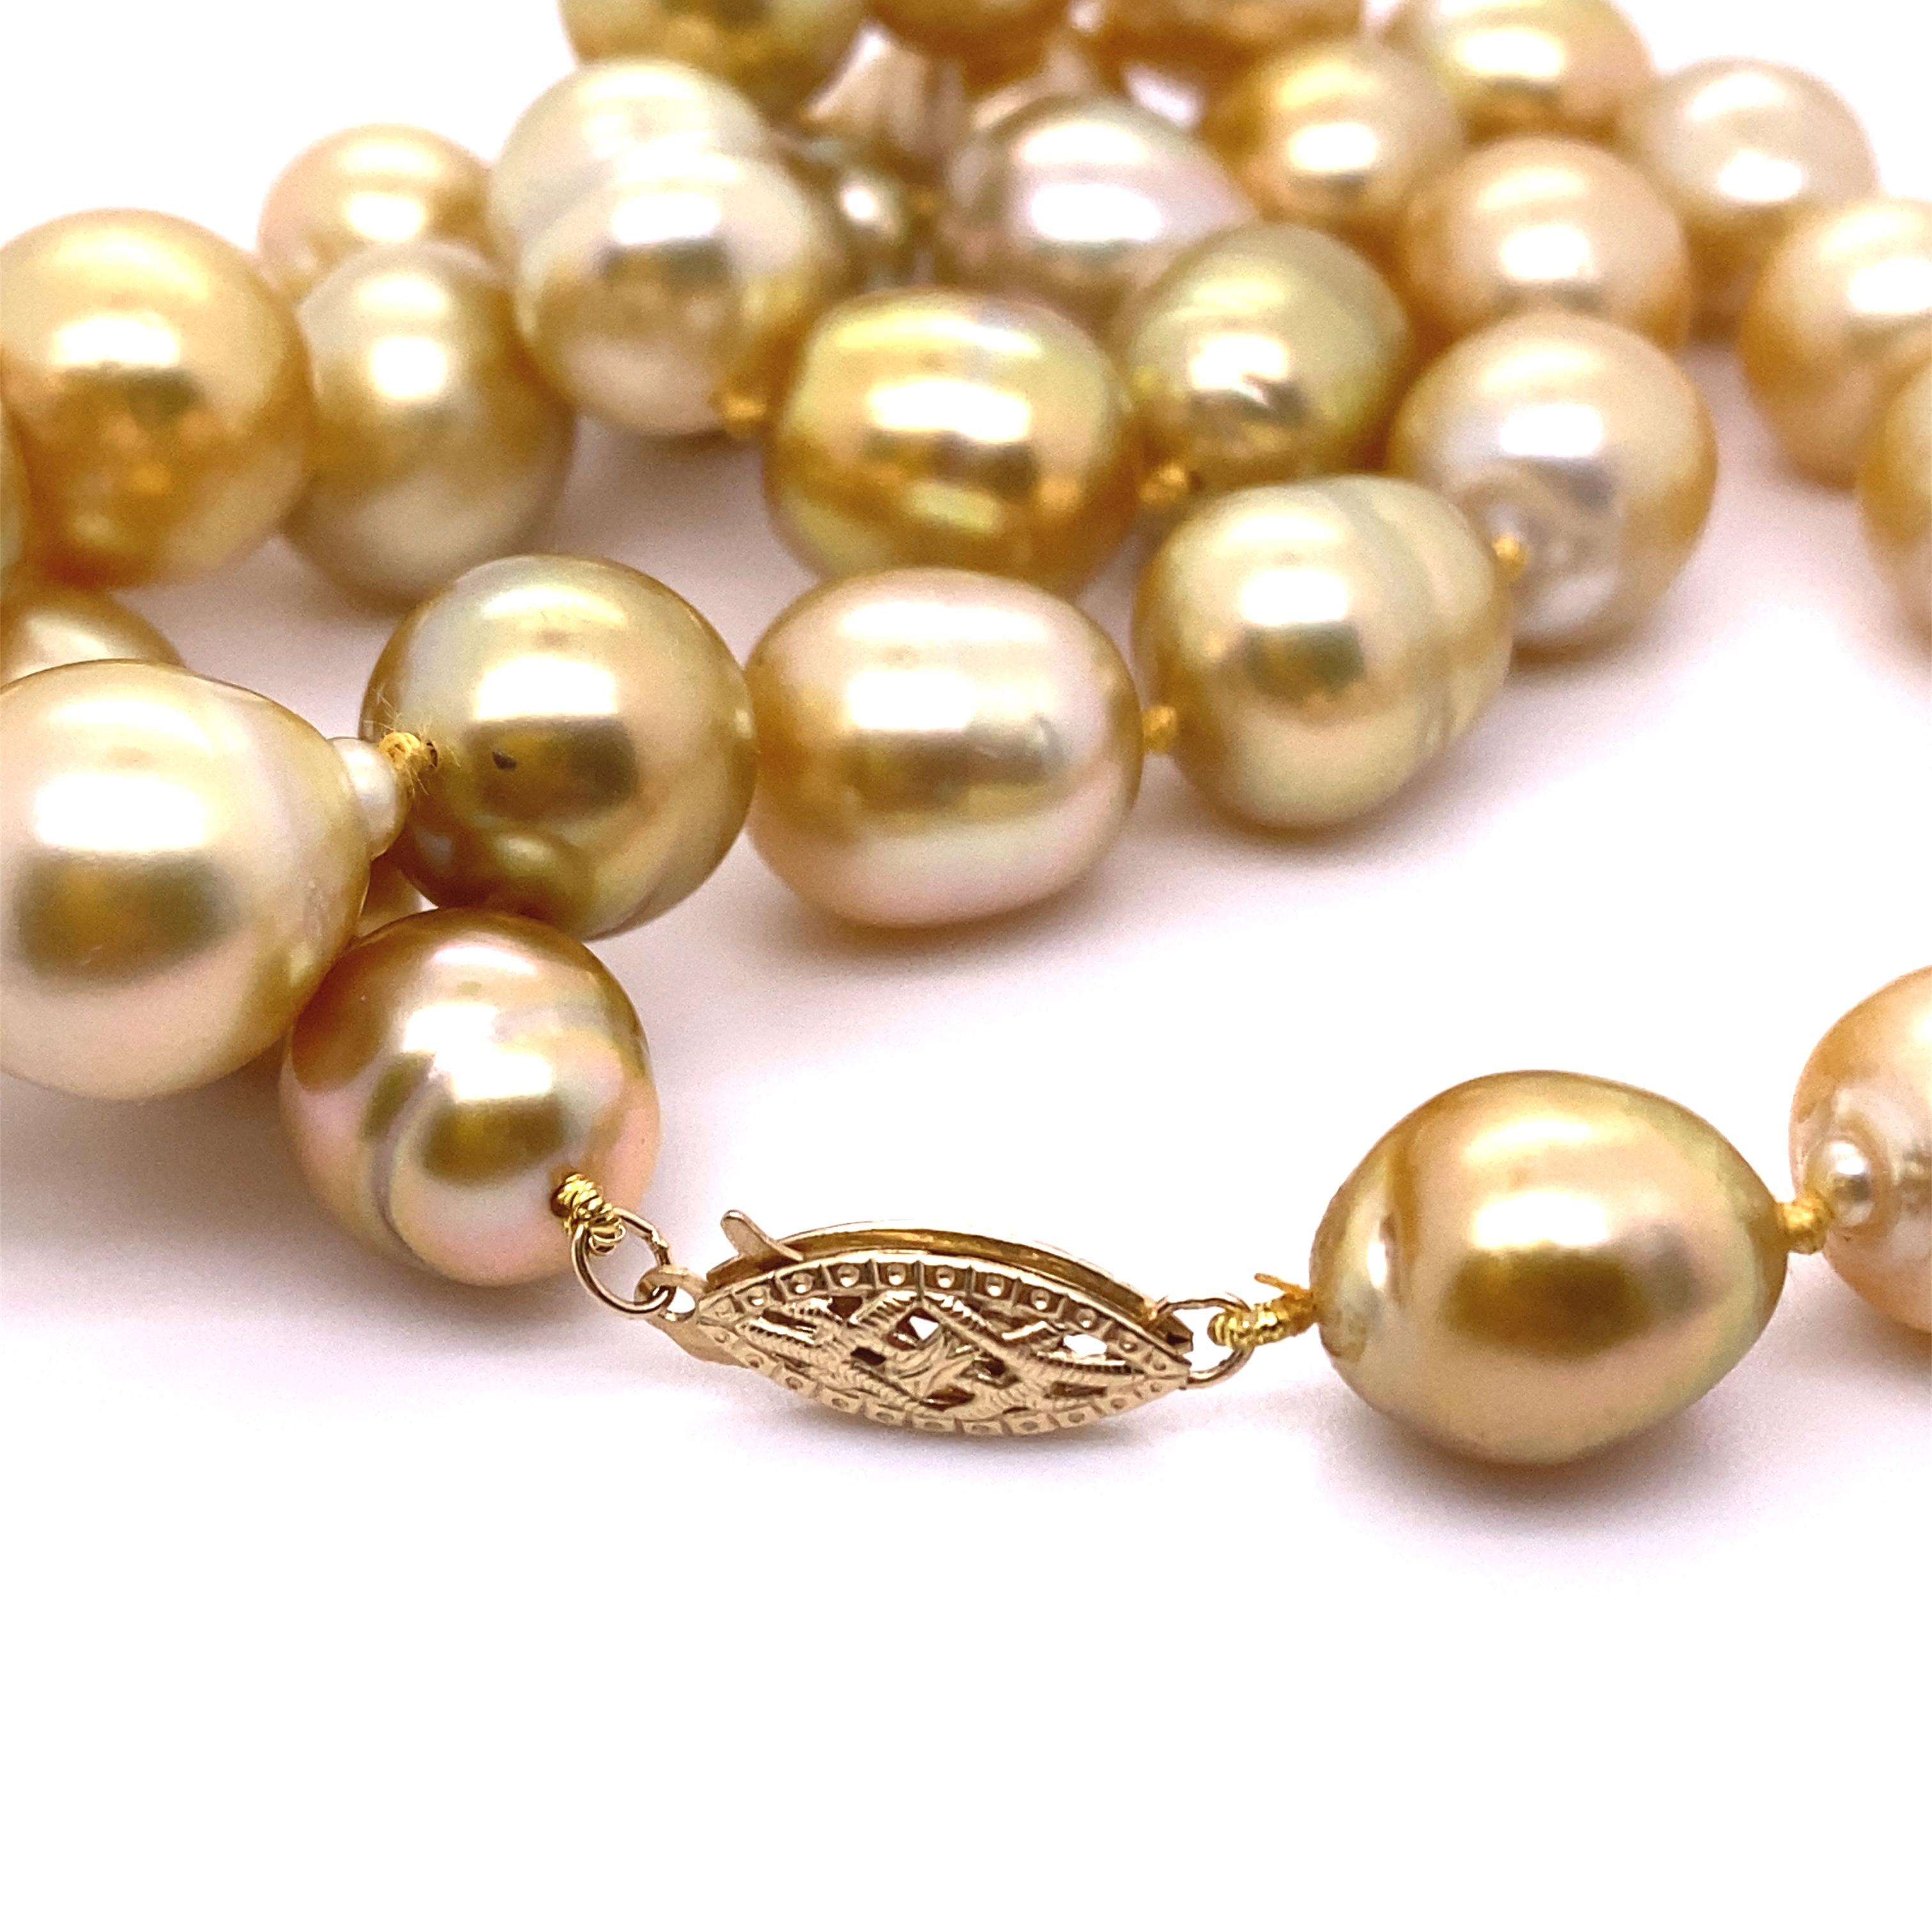 Uncut Natural, Golden Yellow Baroque Pearls Strand Necklace, 14K Gold Clasp For Sale